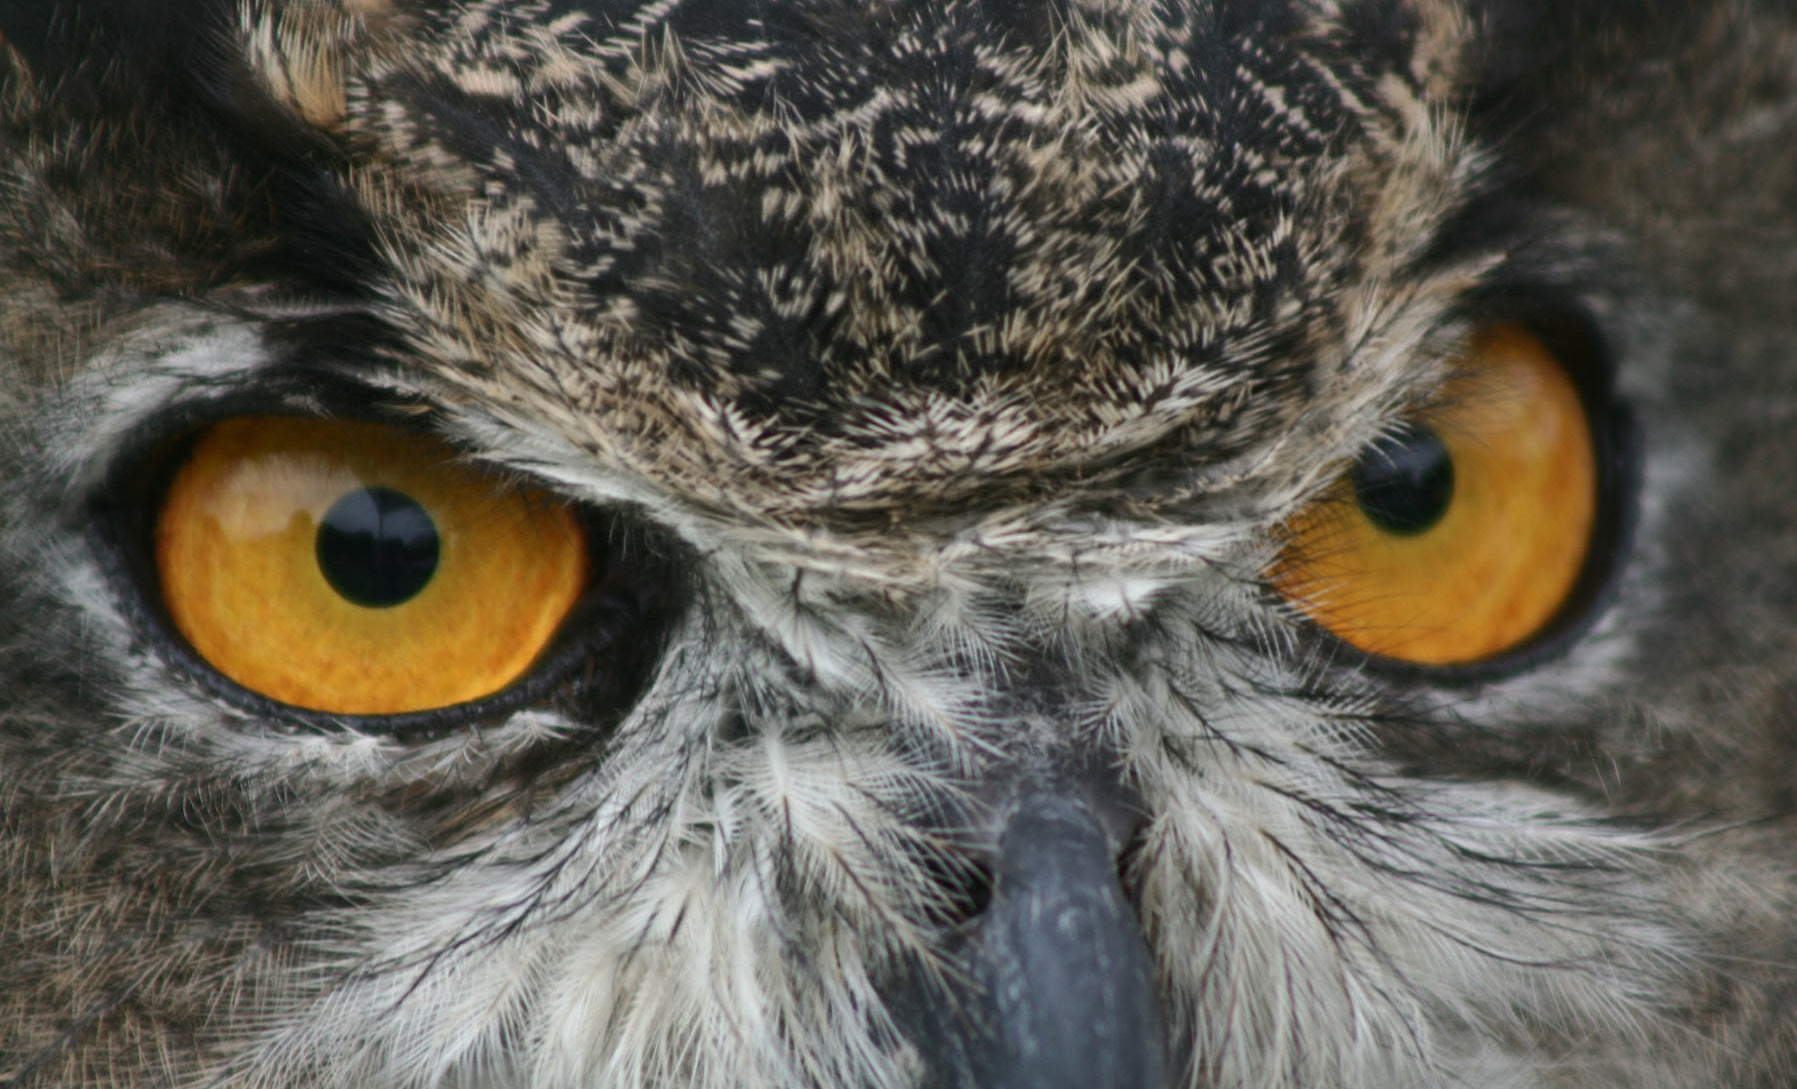 In the Forests of the Night: Appalachia’s Great Horned Owl